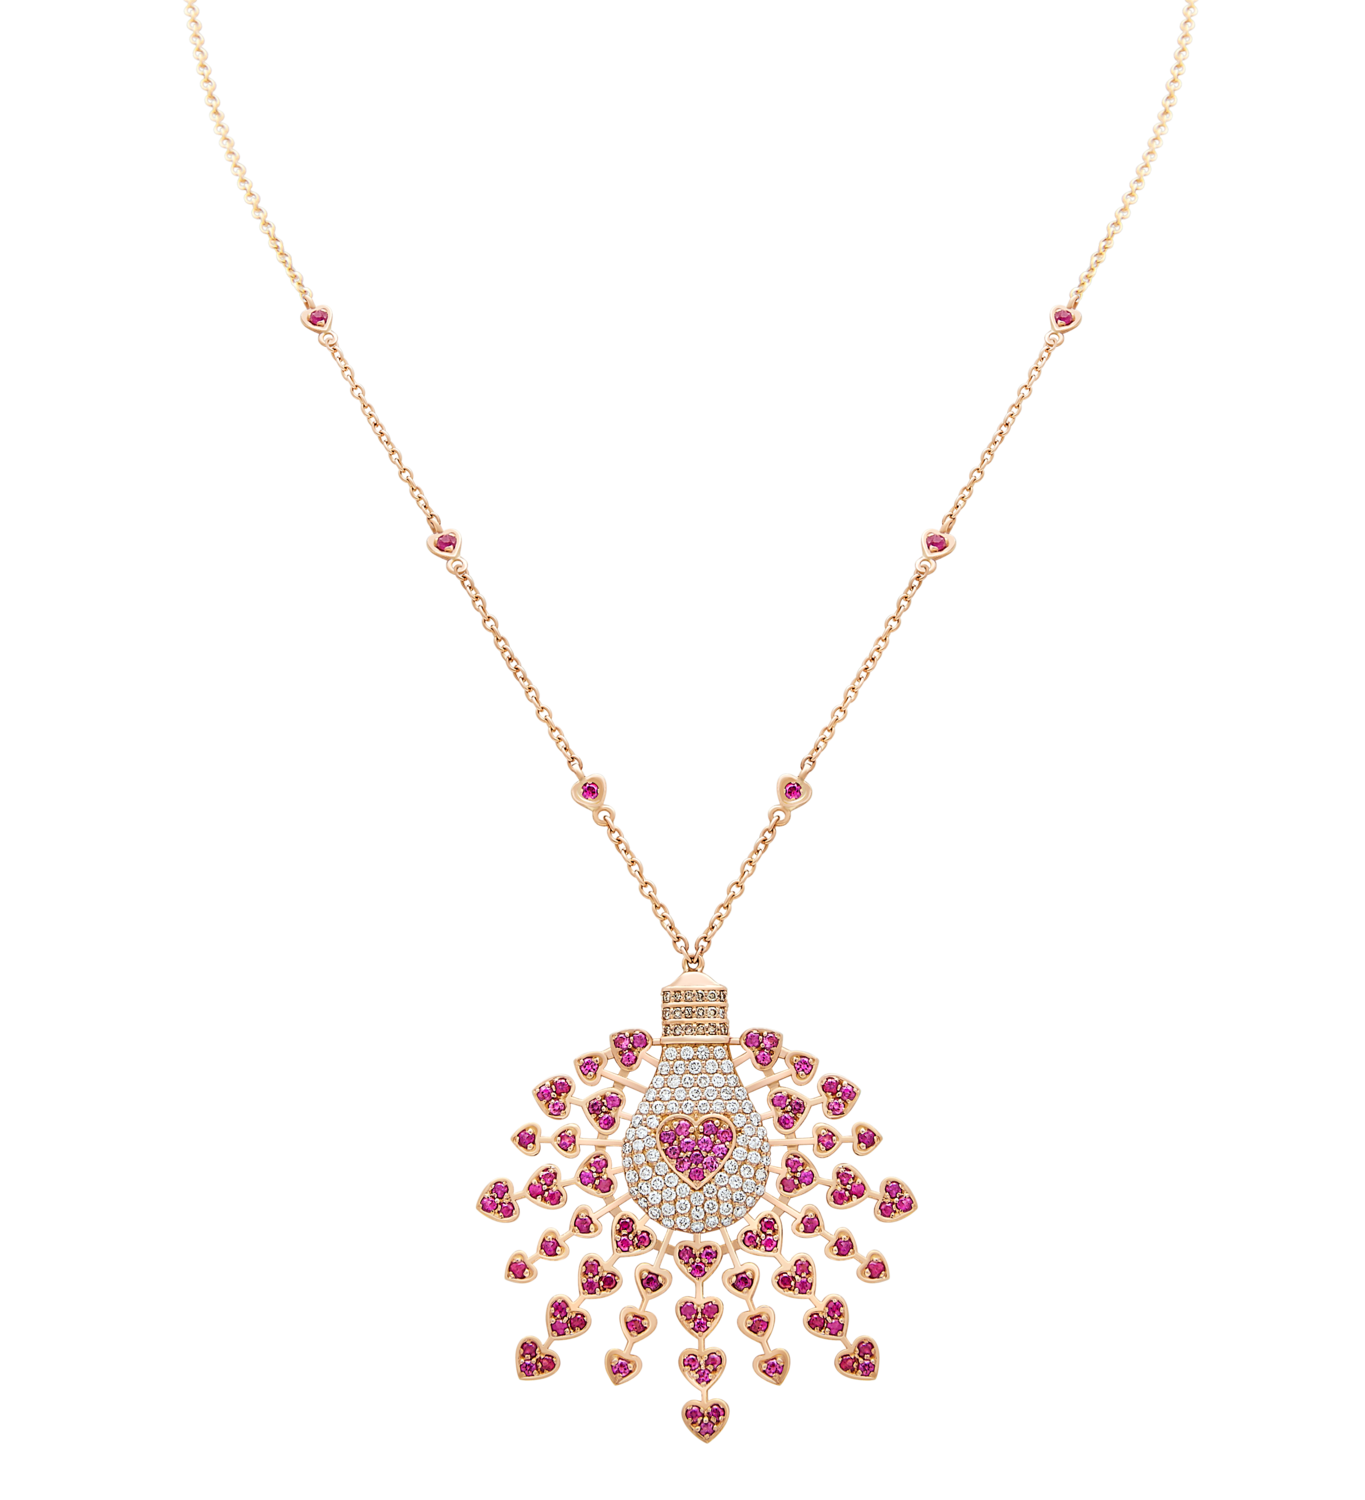 Light Diamond Necklace Love with Ruby